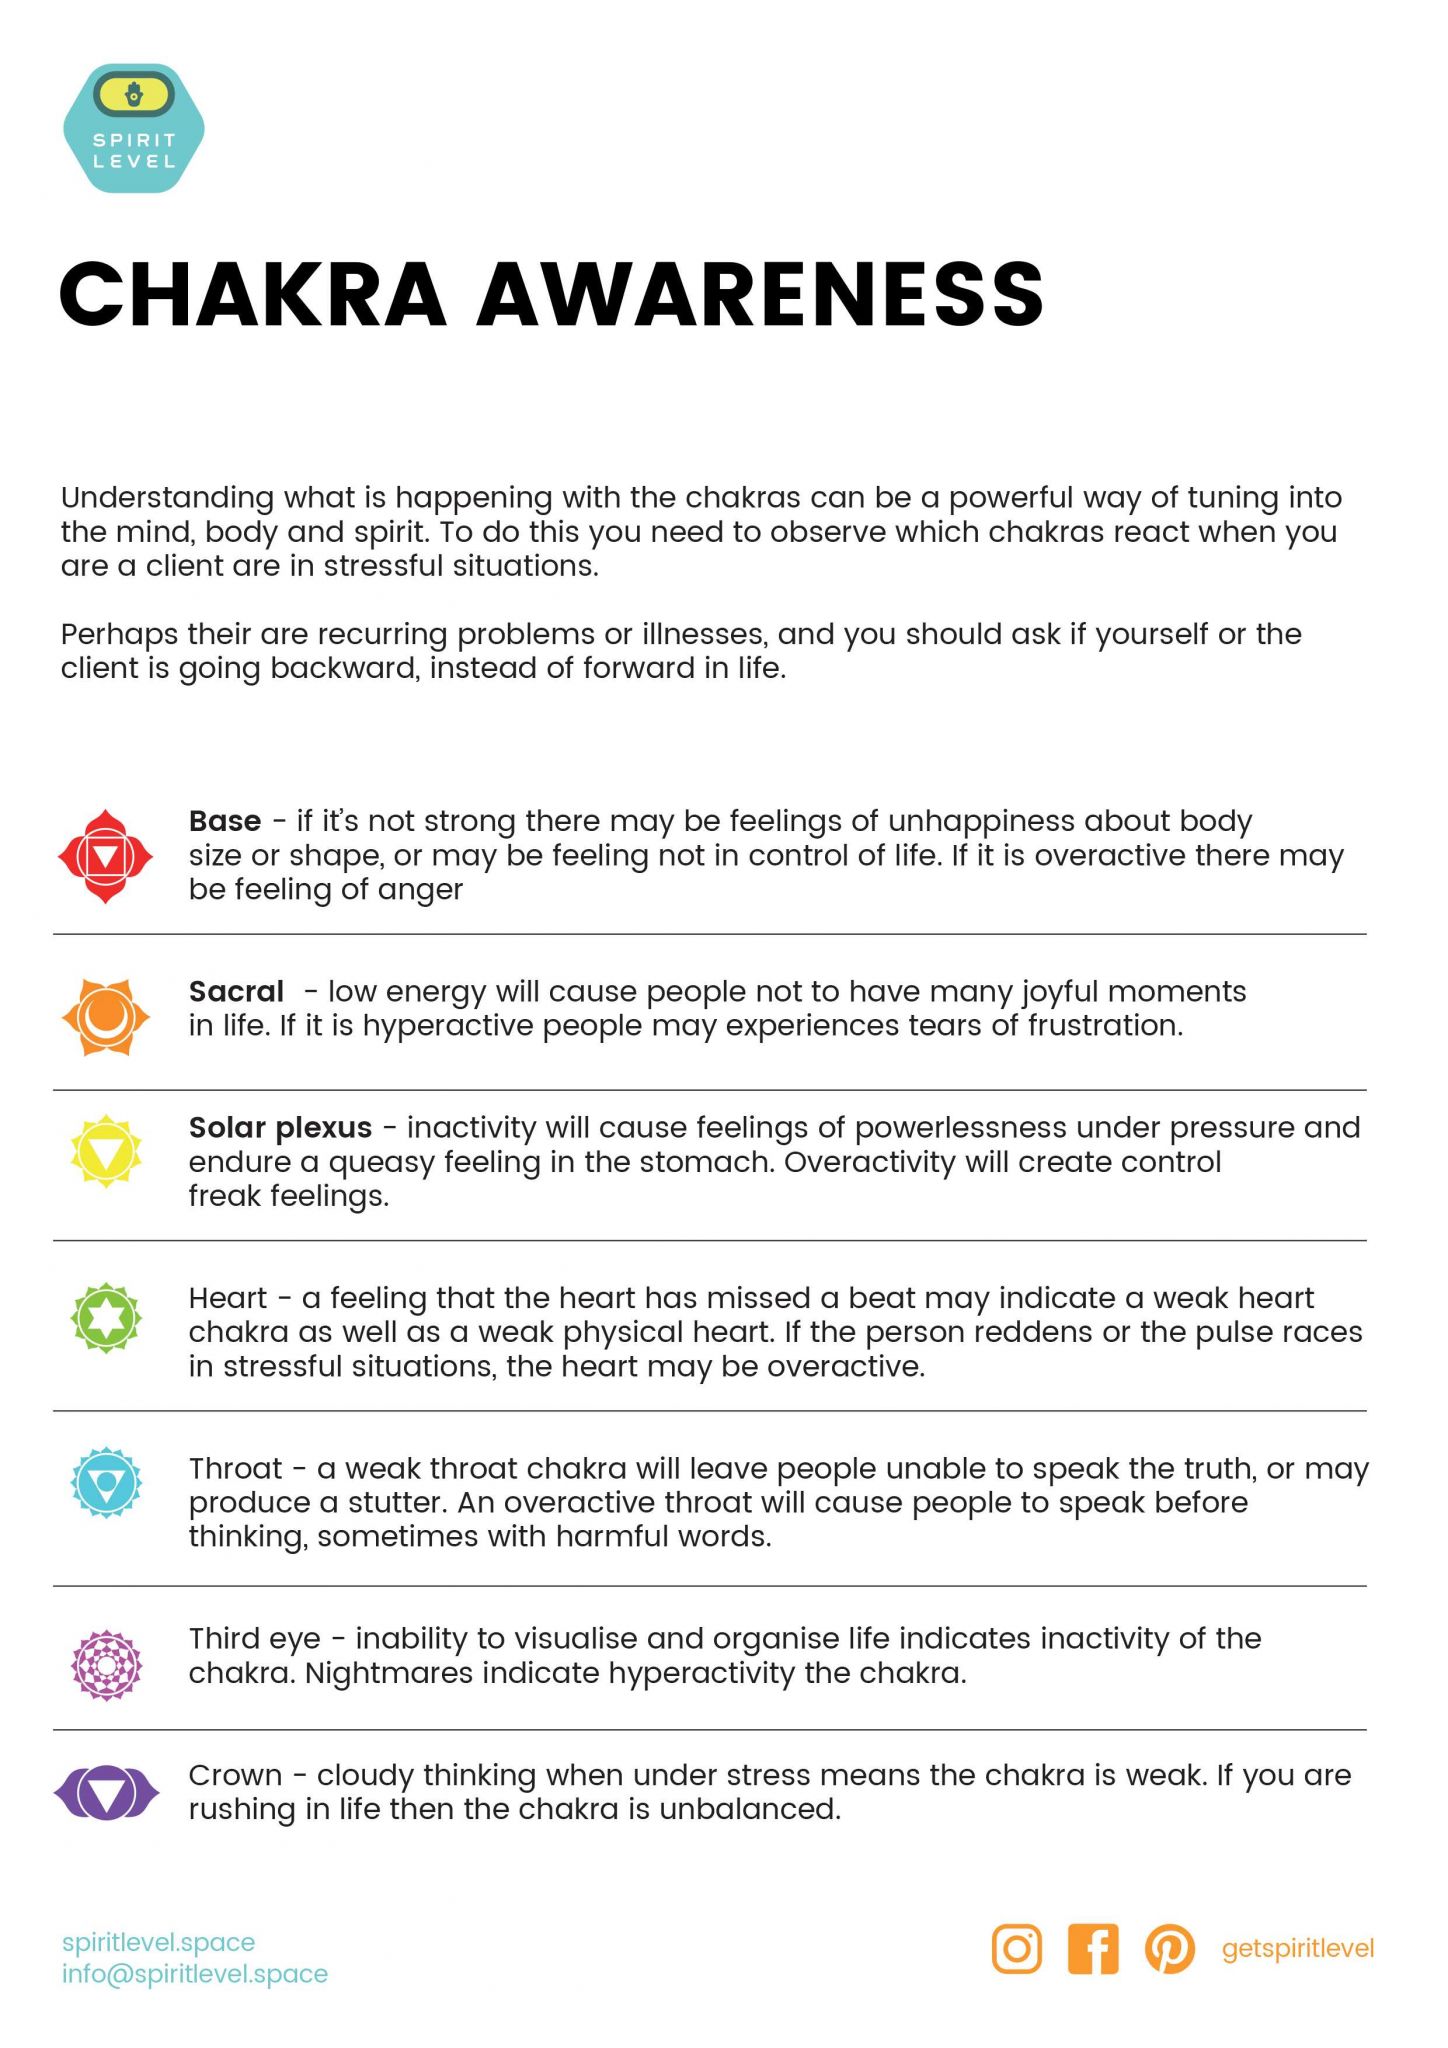 Specific Heat Problems Worksheet Also Worksheet for Chakra Awareness Understand How Your Emotions Can